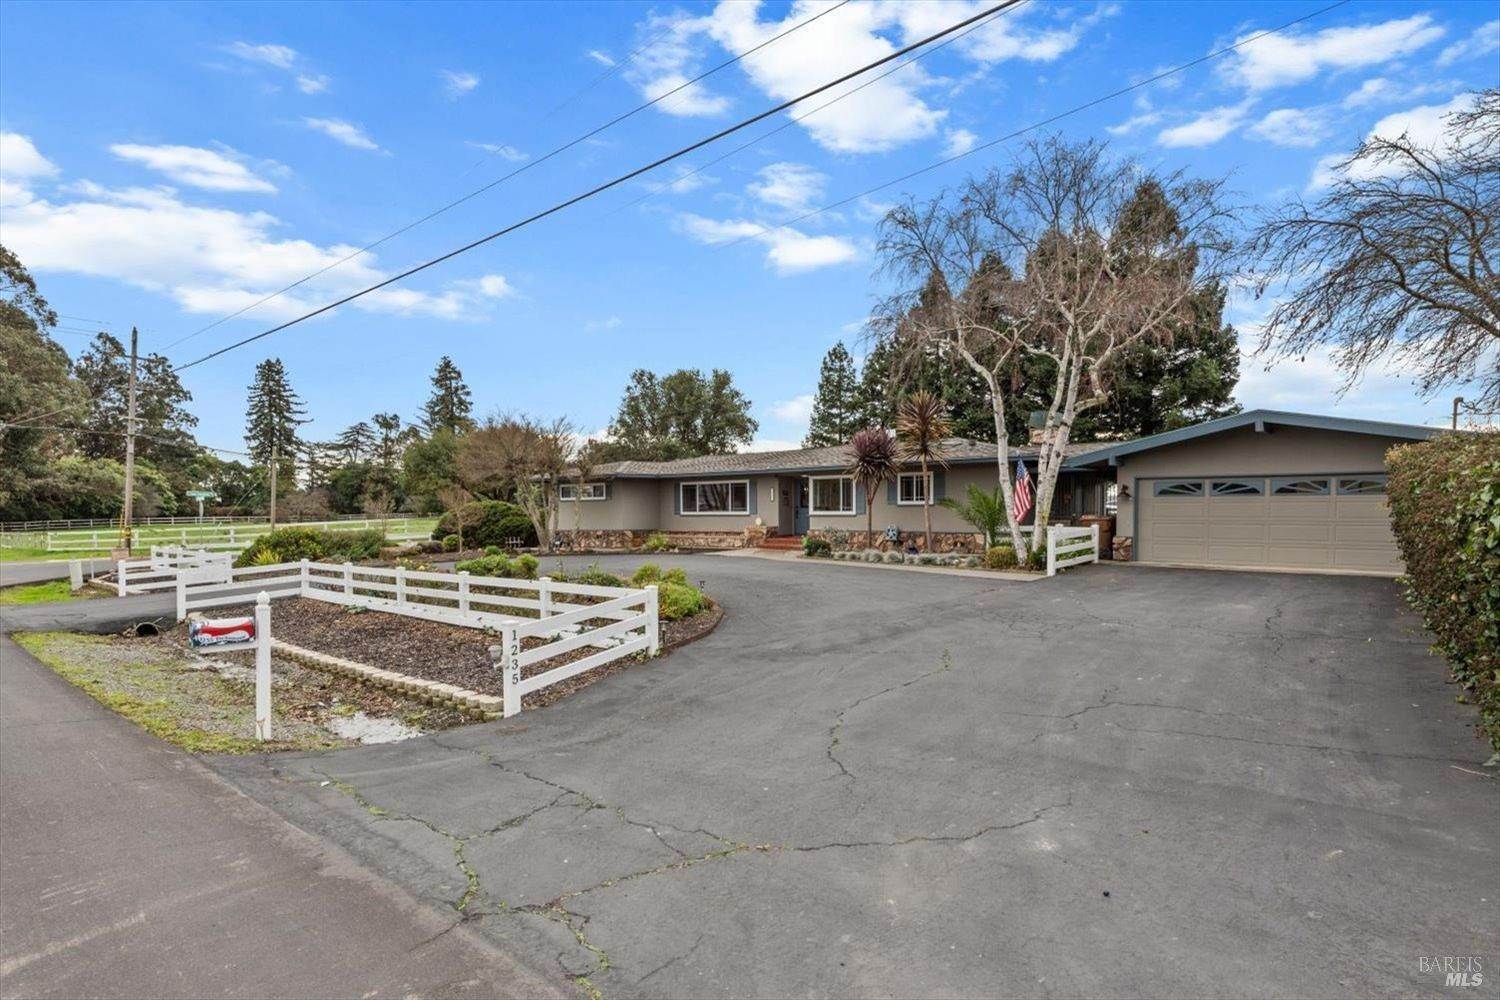 32. Single Family Homes for Sale at 1235 Cuttings Wharf Rd. Napa 1235 Cuttings Wharf Rd. Napa, California 94559 United States